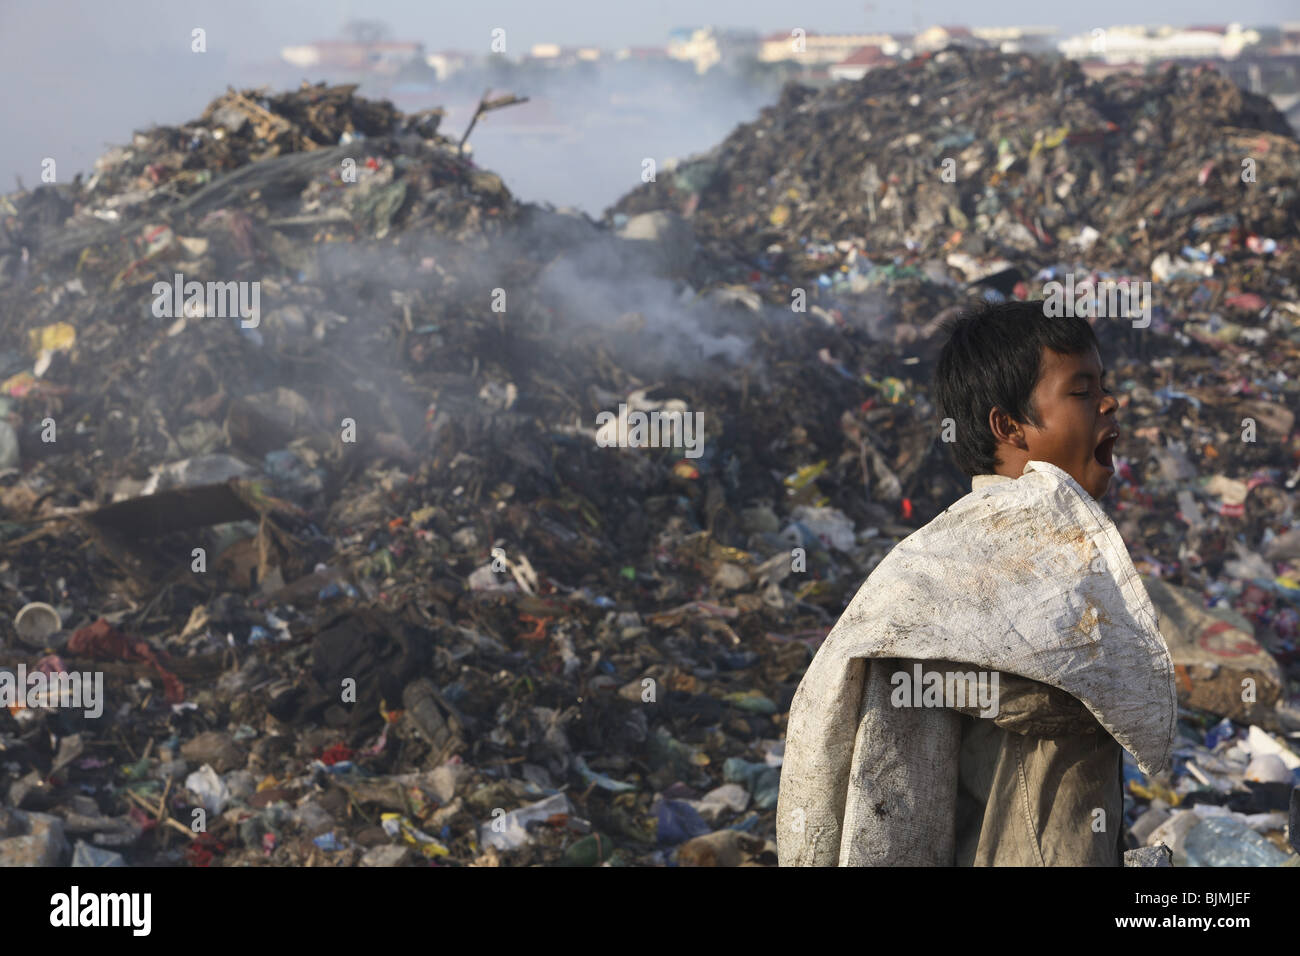 A young boy yawns while working on a garbage dump in Phnom Penh, Cambodia. Stock Photo